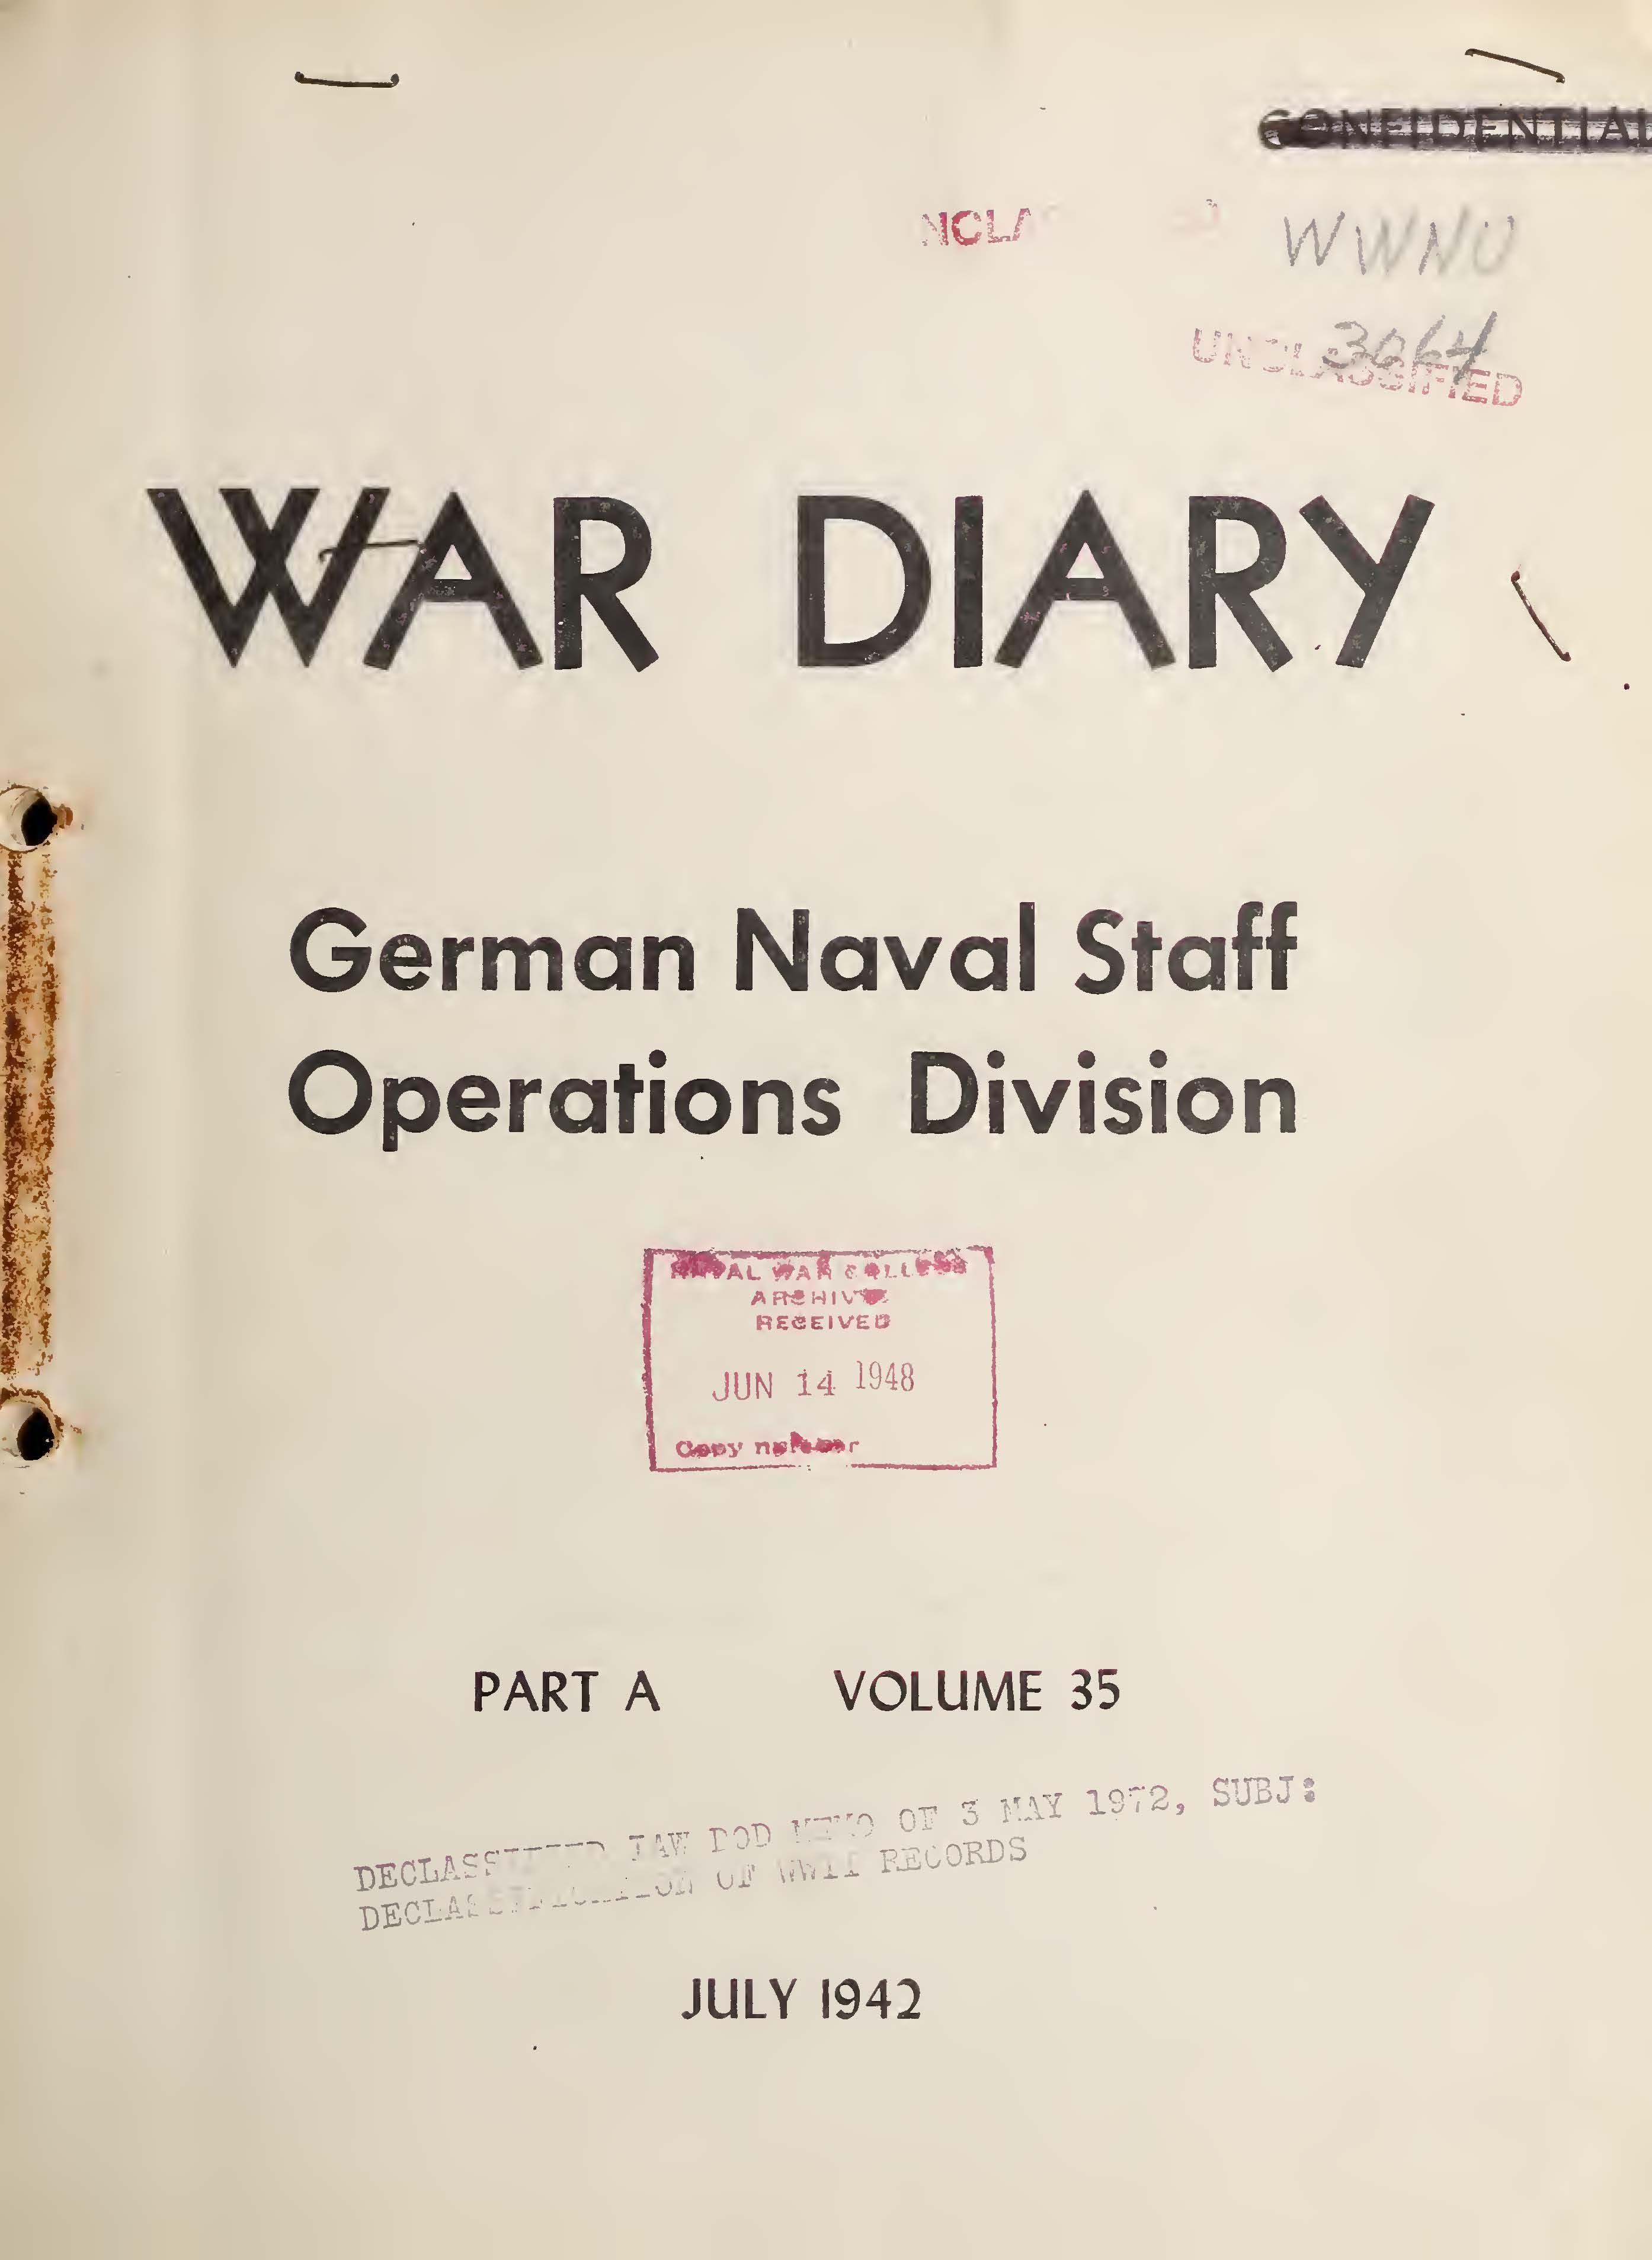 War Diary of German Naval Staff (Operations Division) Part A, Volume 35, July 1942